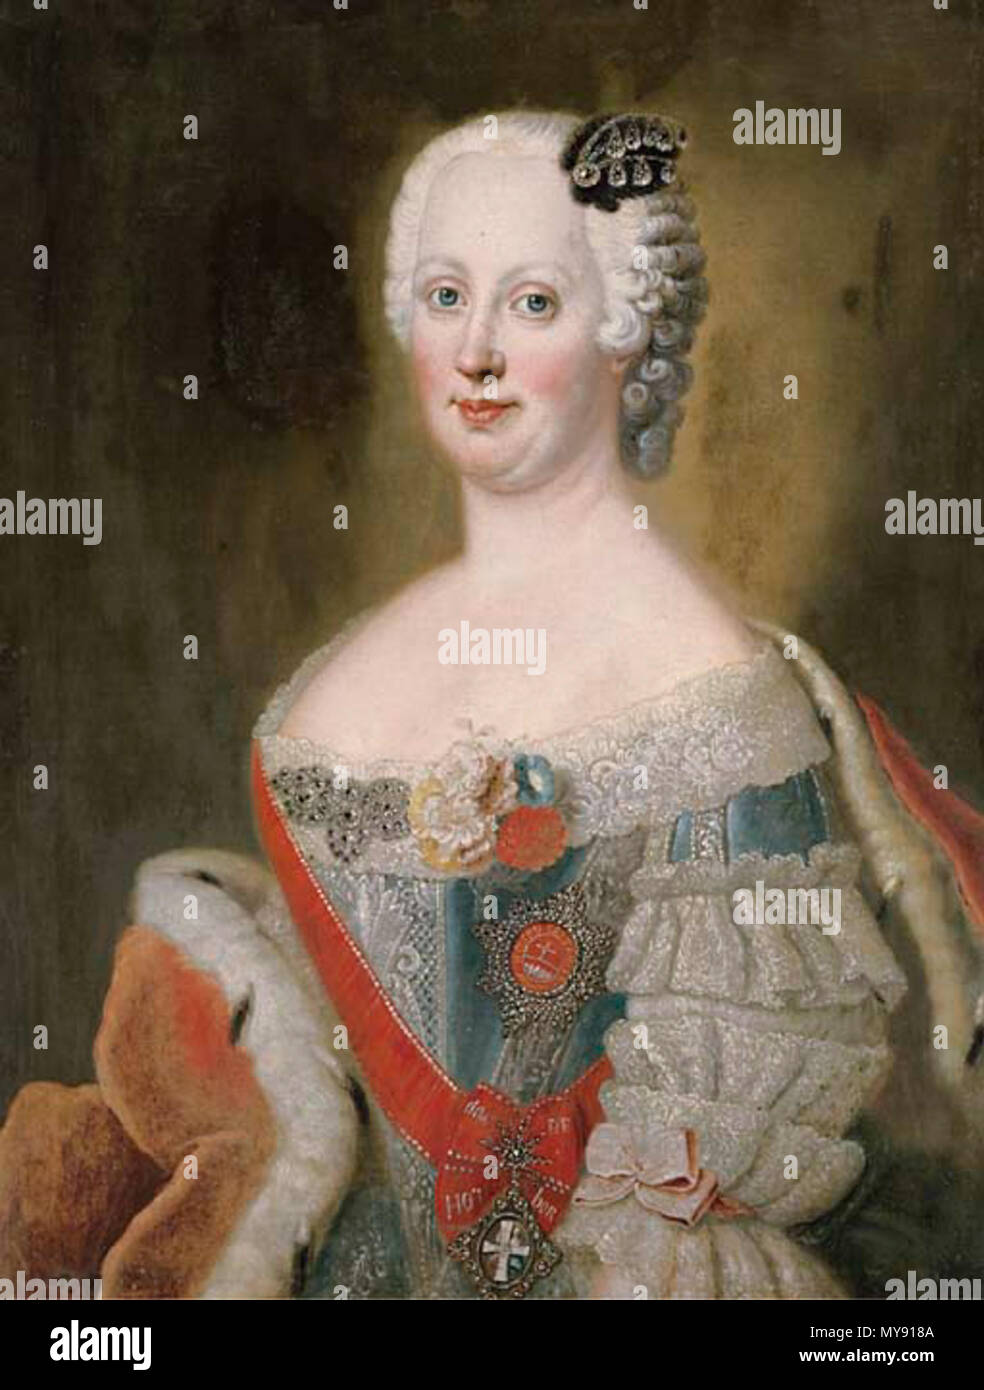 . Portrait of noblewoman, traditionally identified as Catherine the Great (l762-1796), Empress of Russia, bust-length, in a blue silk dress with lace trim and an ermine-lined cloak oil on canvas 32 x 24½ in. (81.3 x 61.6 cm.) PROPERTY FROM THE ESTATE OF BARONESS AIDA NORA VON DEM BUSSCHE-STREITHORST We are grateful to Sir John Guinness for pointing out that the sitter is in fact Johanna Elizabeth, Princess of Holstein-Gottorp (1712-1760), wife of Prince Christian August, Prince of Anhalt-Zerbst (1690-1727) and mother of the Tsarina Catherine the Great, wearing the Order of Saint Catherine. The Stock Photo